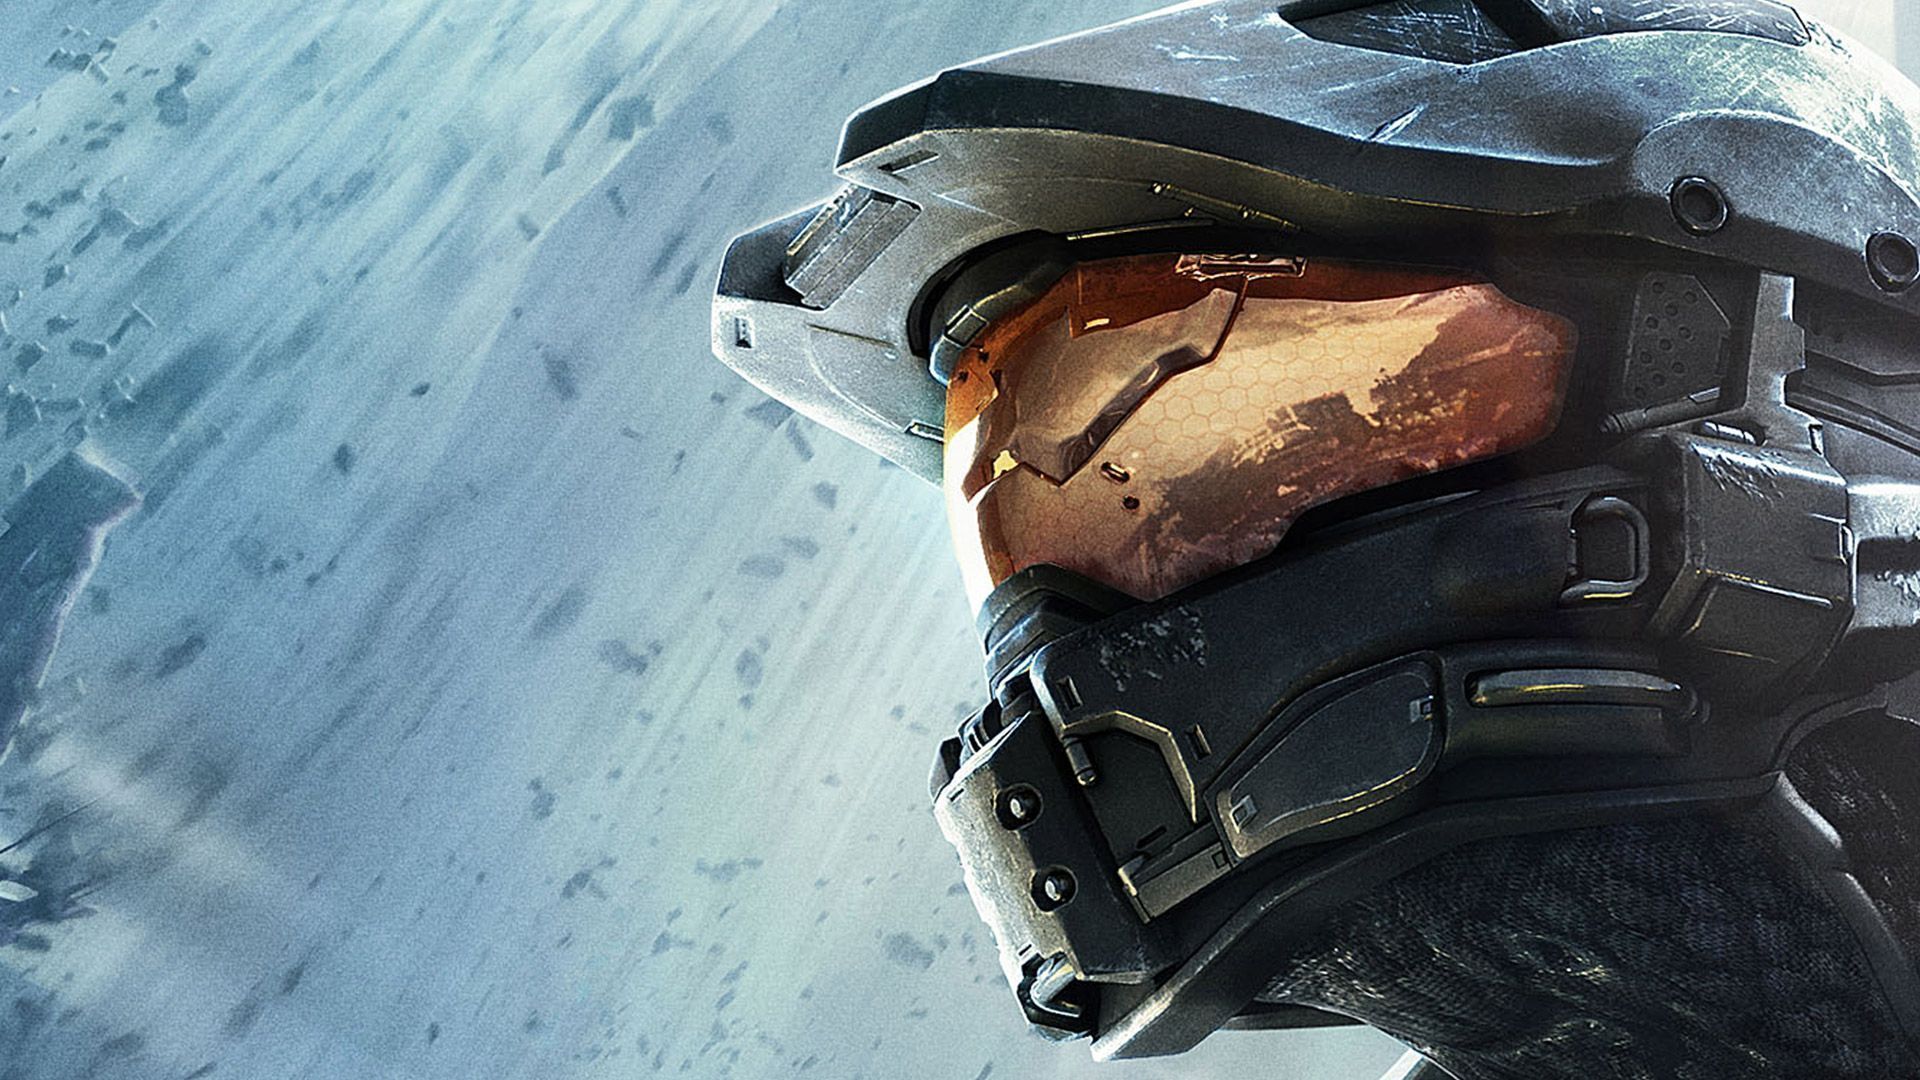 Halo Hd Wallpaper | Search Results | My Wallpapers HD Ideas